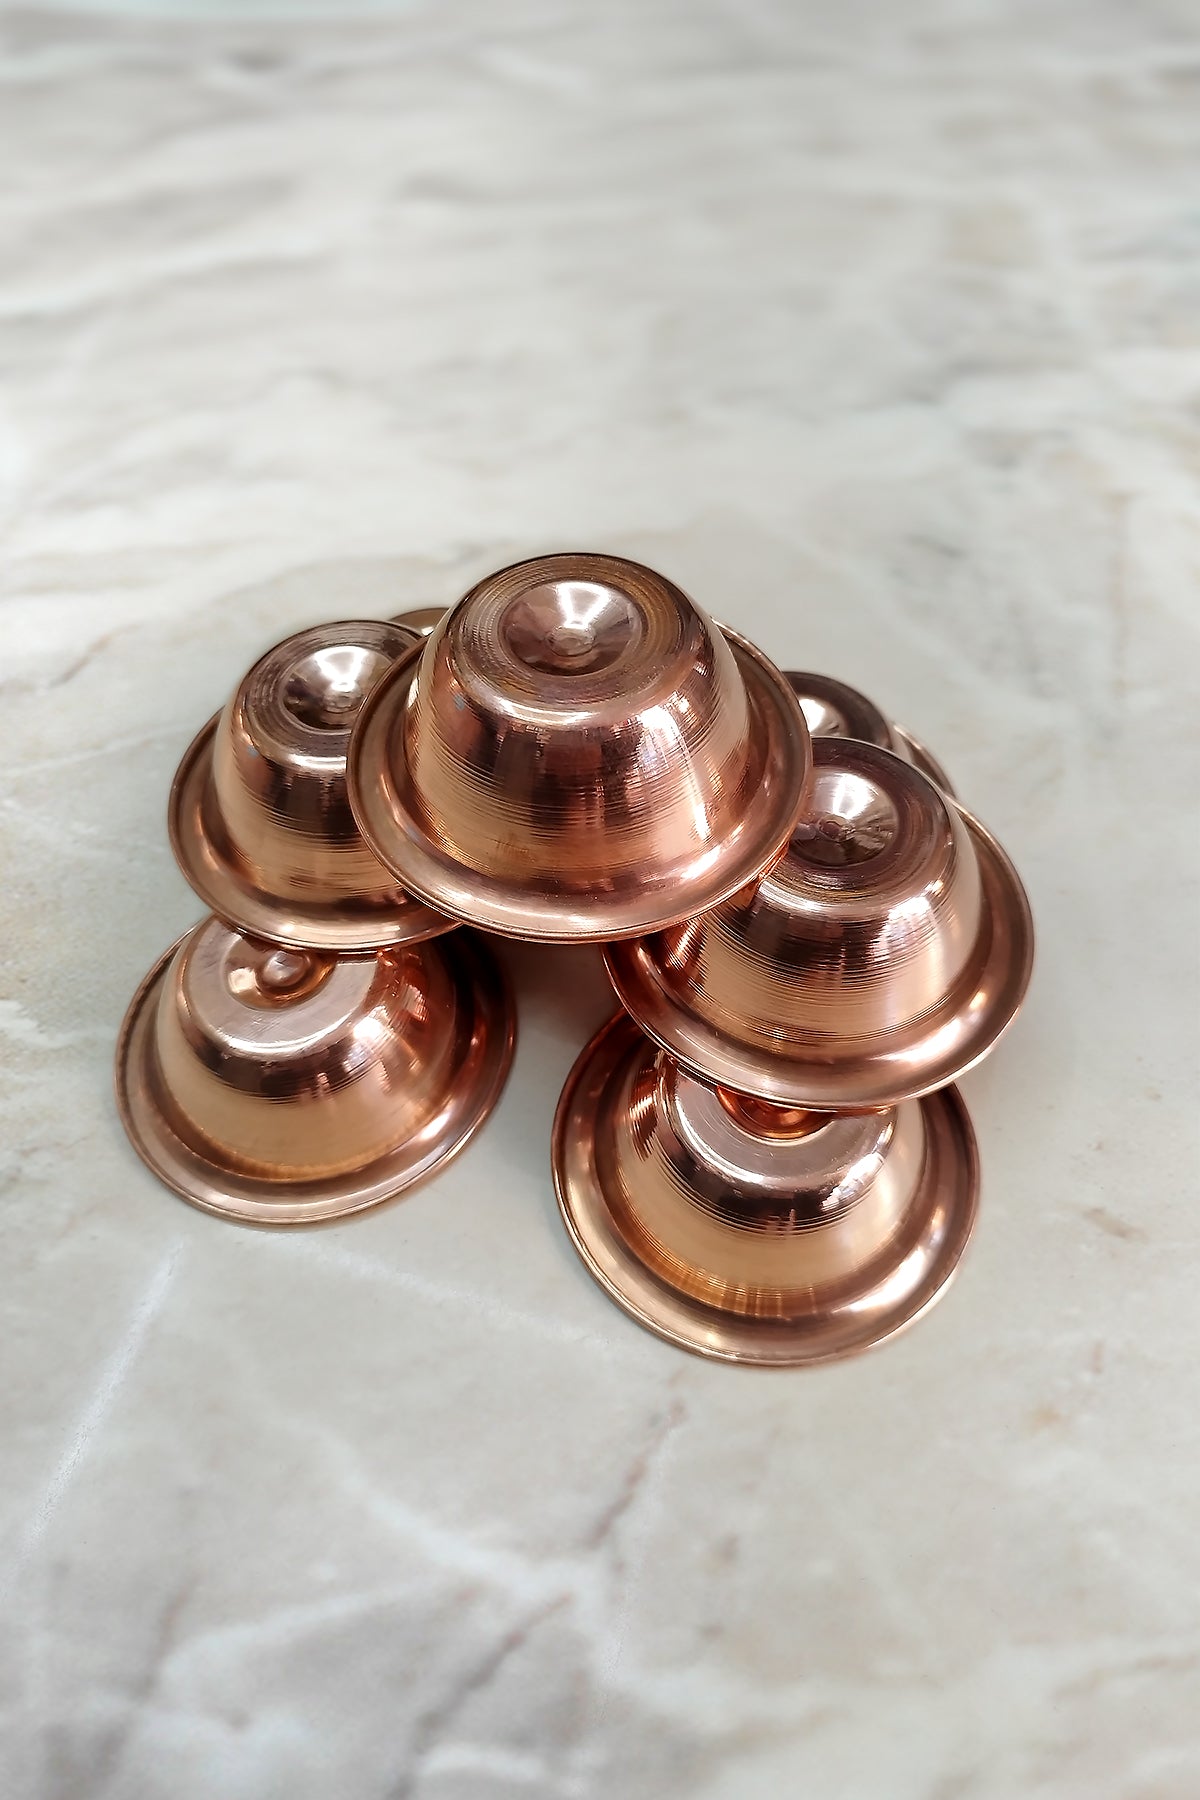 Copper Offering Bowls - Perfect for Meditations and Altars